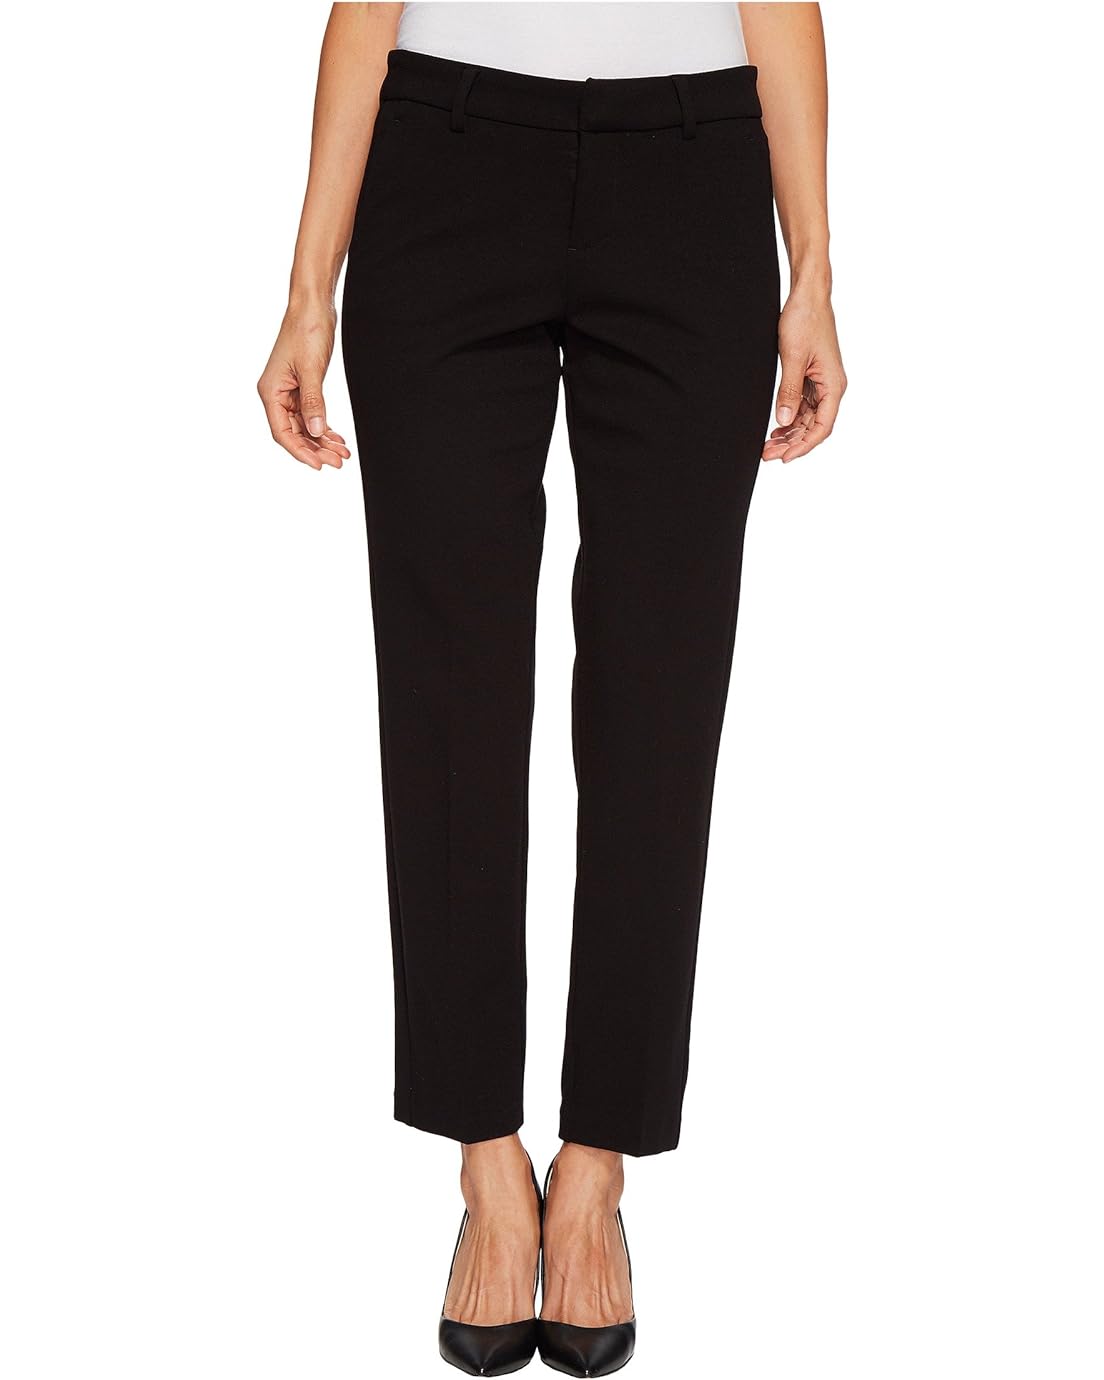 Liverpool Petite Kelsey Straight Leg Trousers in Super Stretch Ponte Knit